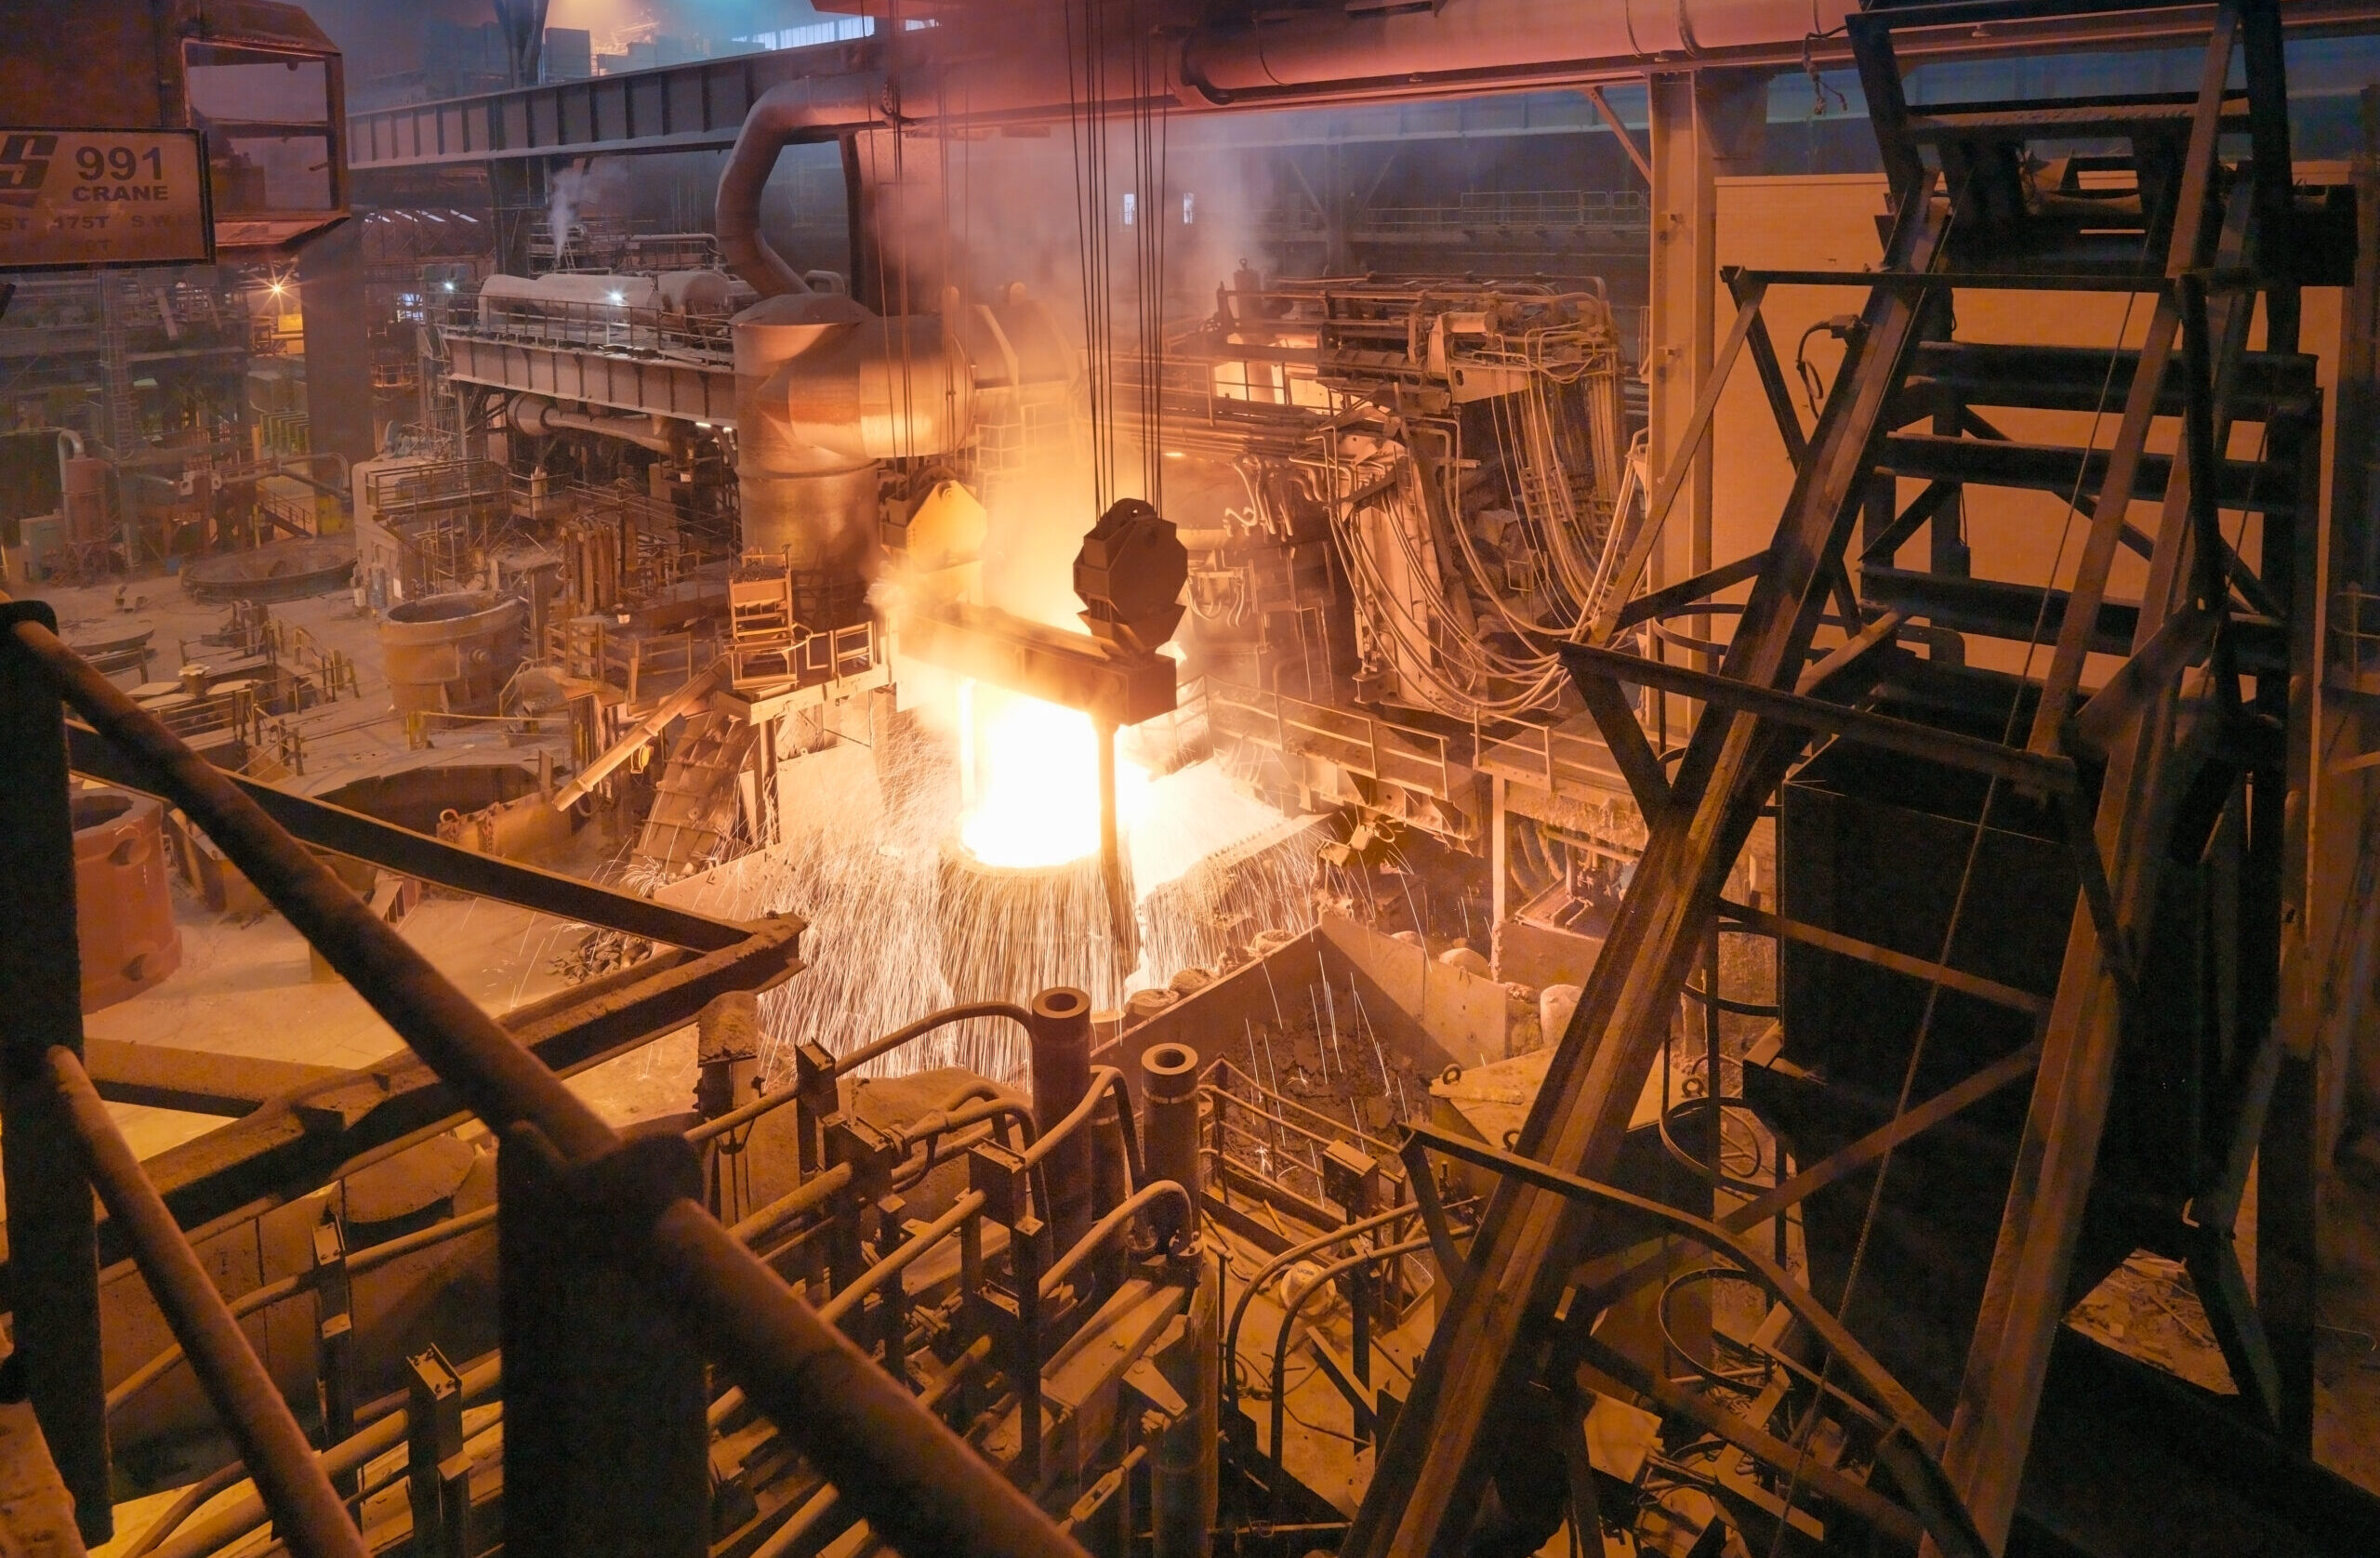 molten-steel-being-poured-in-steelworks-2022-01-25-05-02-09-utc